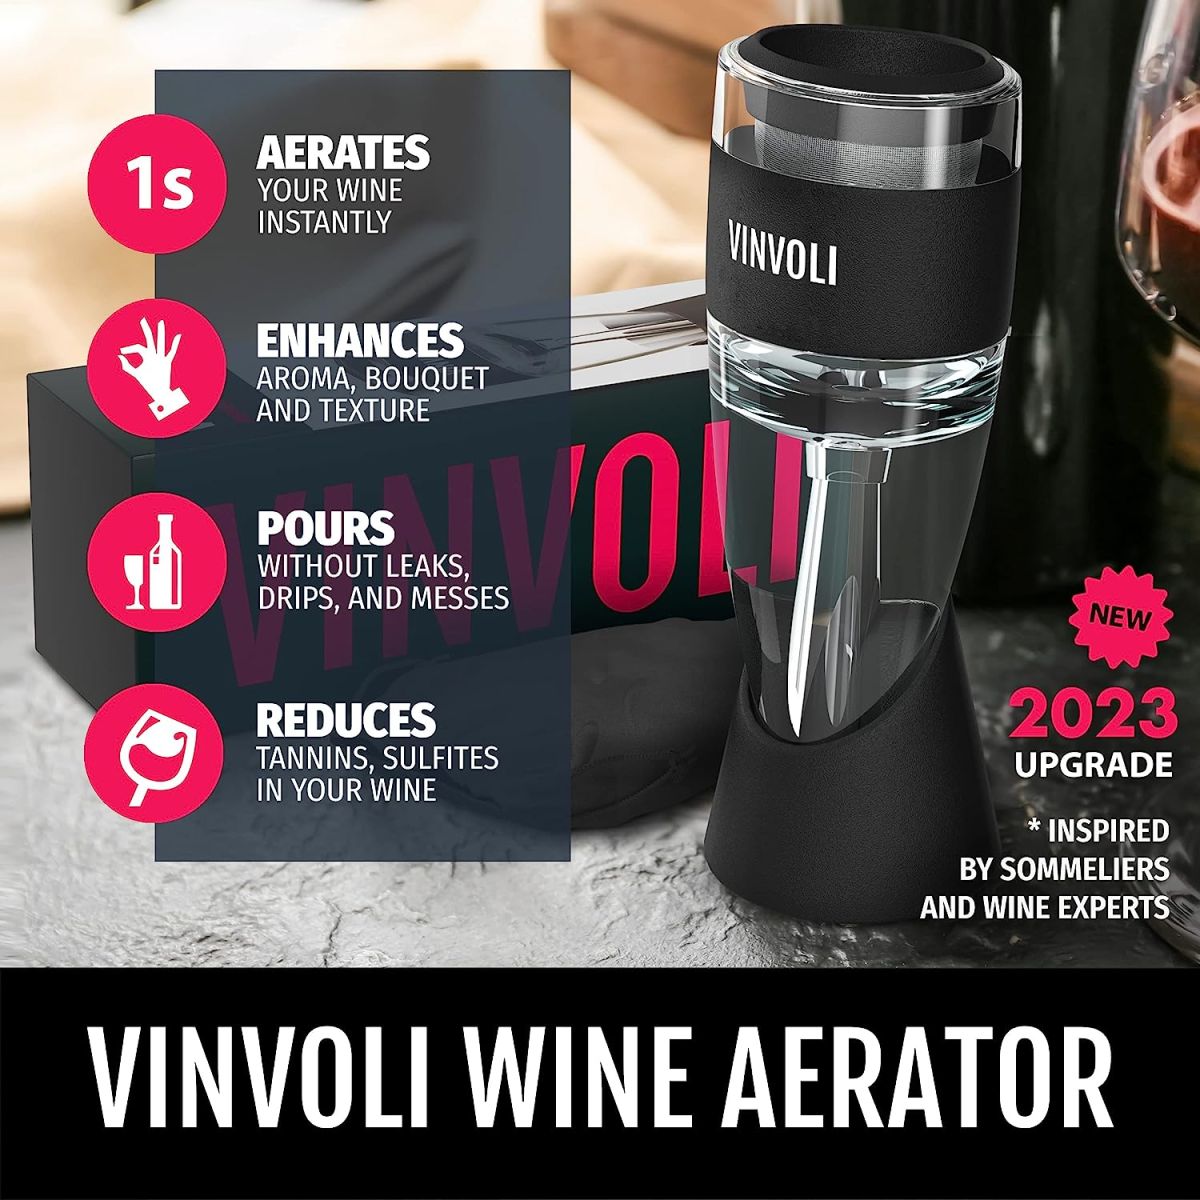 VINVOLI Wine Aerator - New 2023 Luxury Red Wine Aerator Decanter with Unique Three-Stage Aeration, Pourer, Wine Sediment Filter, No-Drip Stand - Quality and Convenience for Wine Lovers and Sommeliers